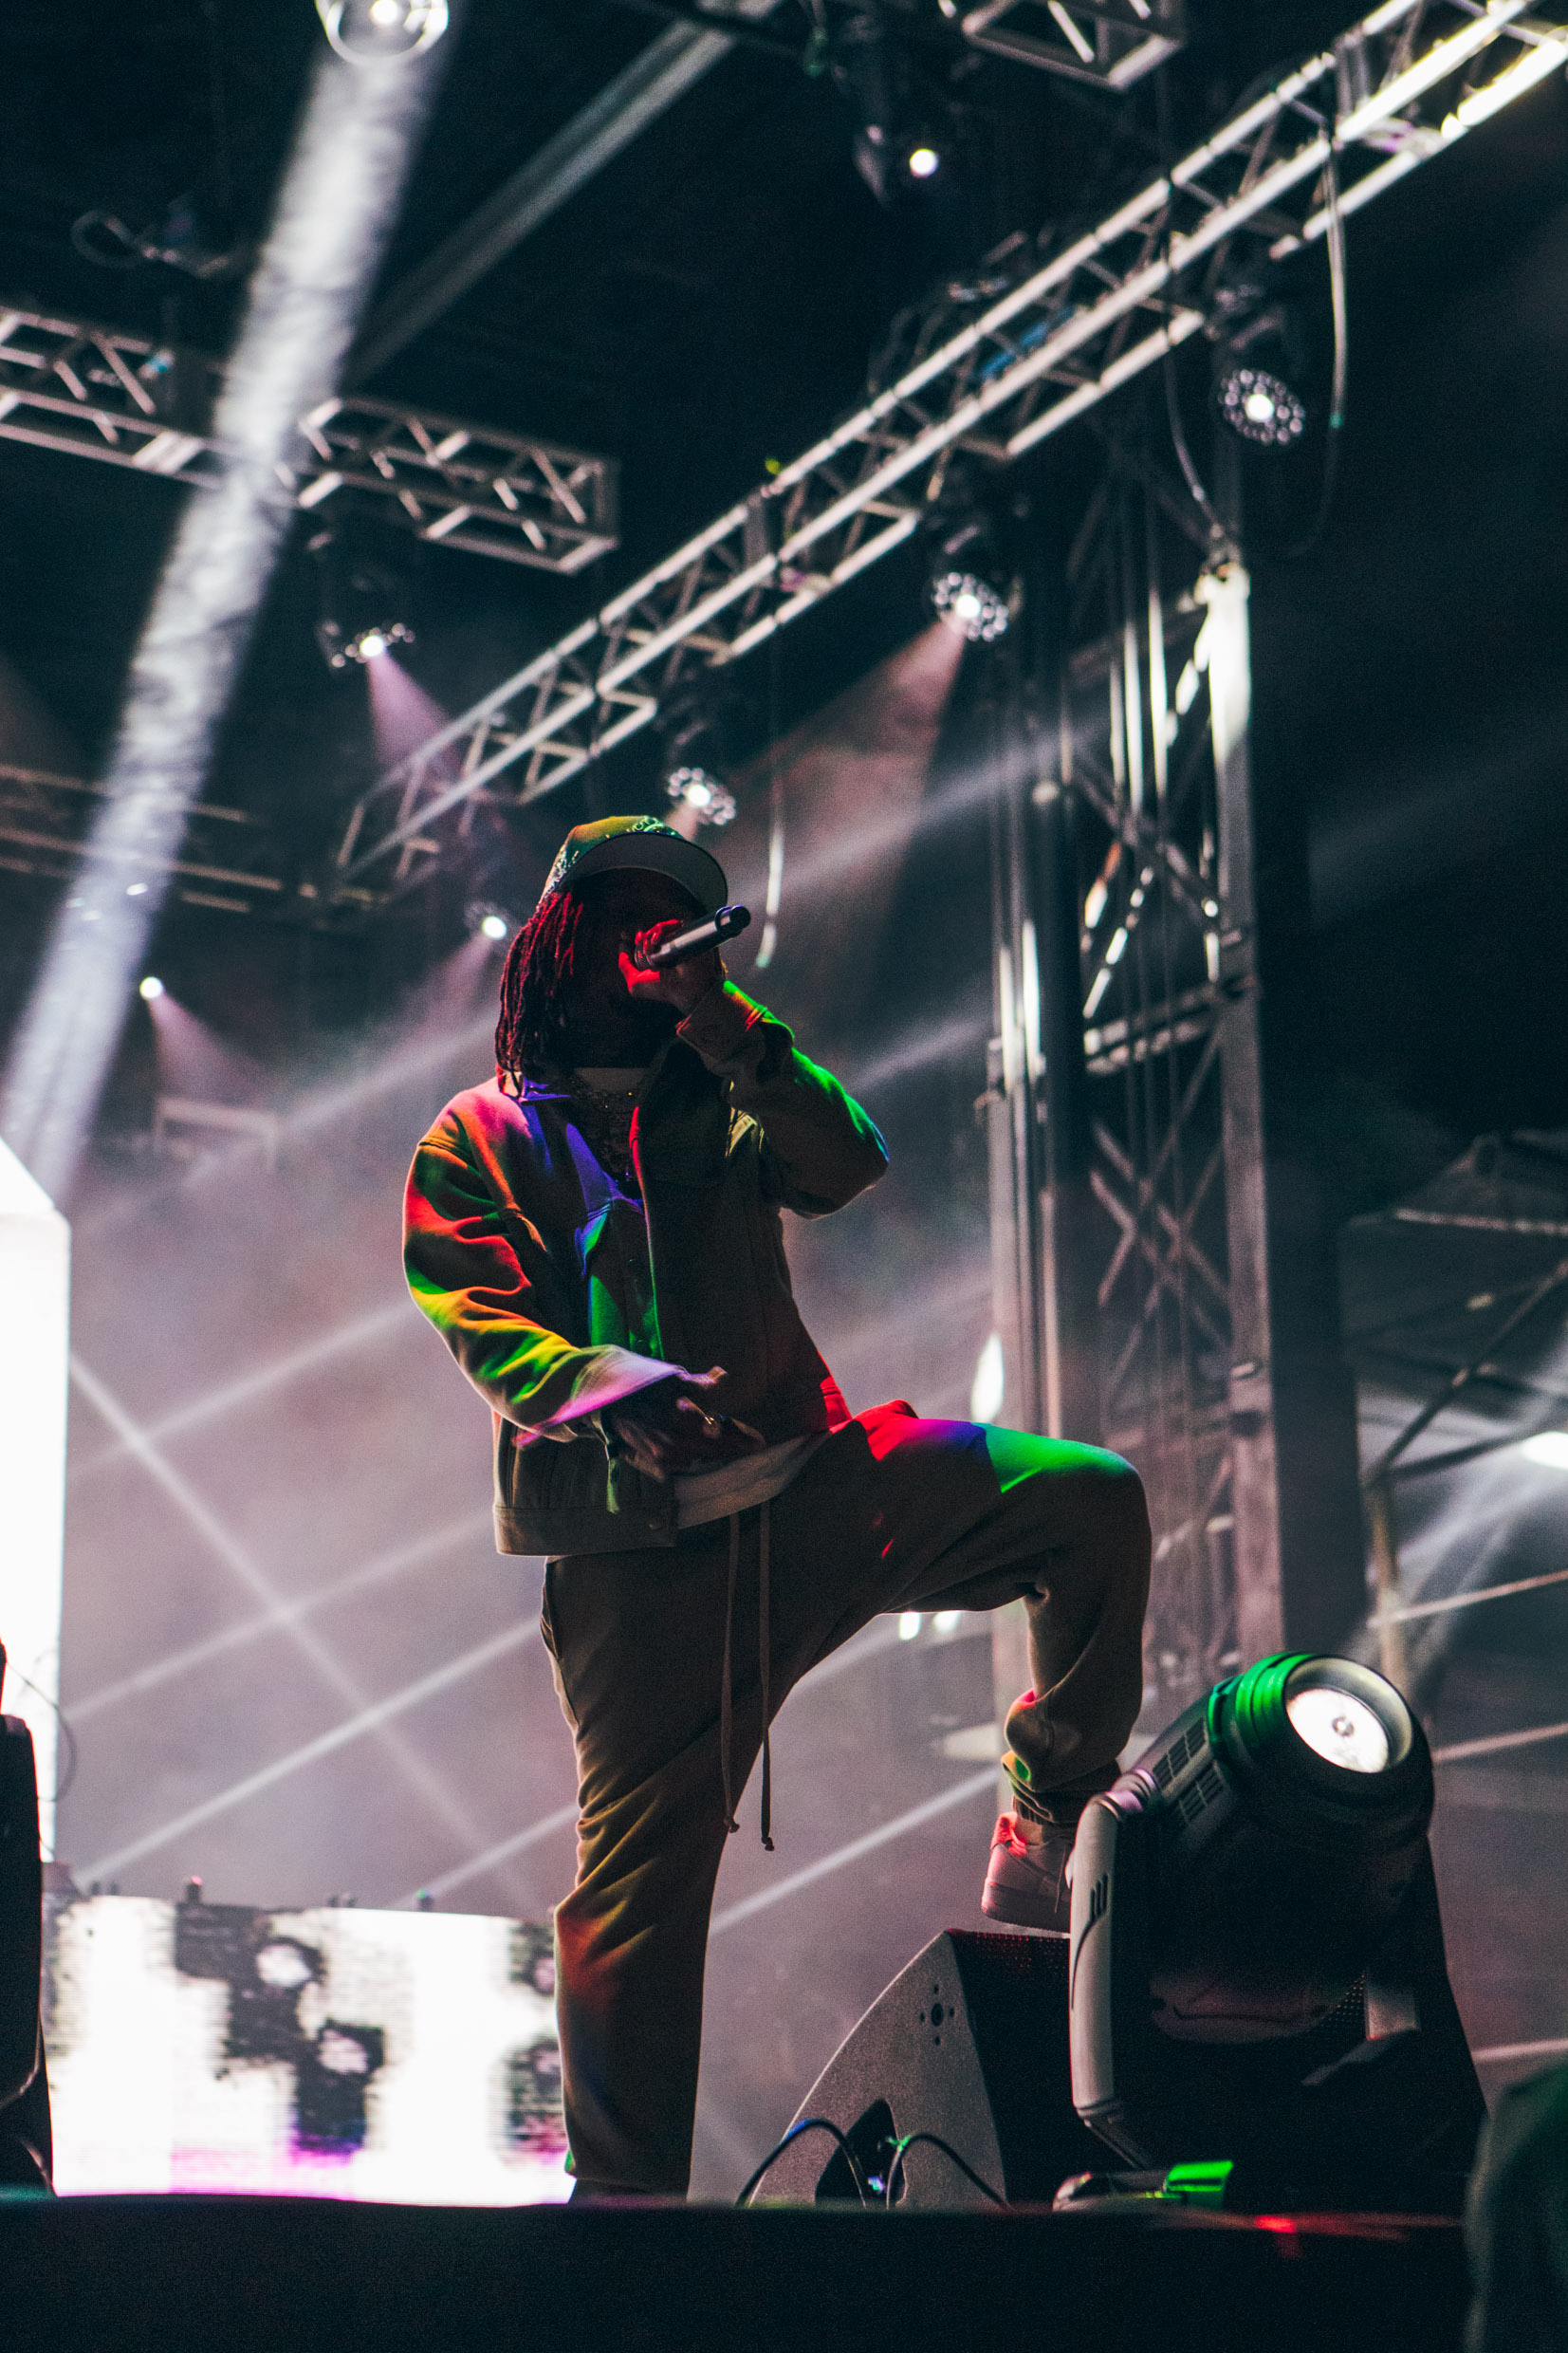 Rolling Loud 2021 Day 1 Photo: 50 Cent, Lil Uzi Vert, Polo G & More